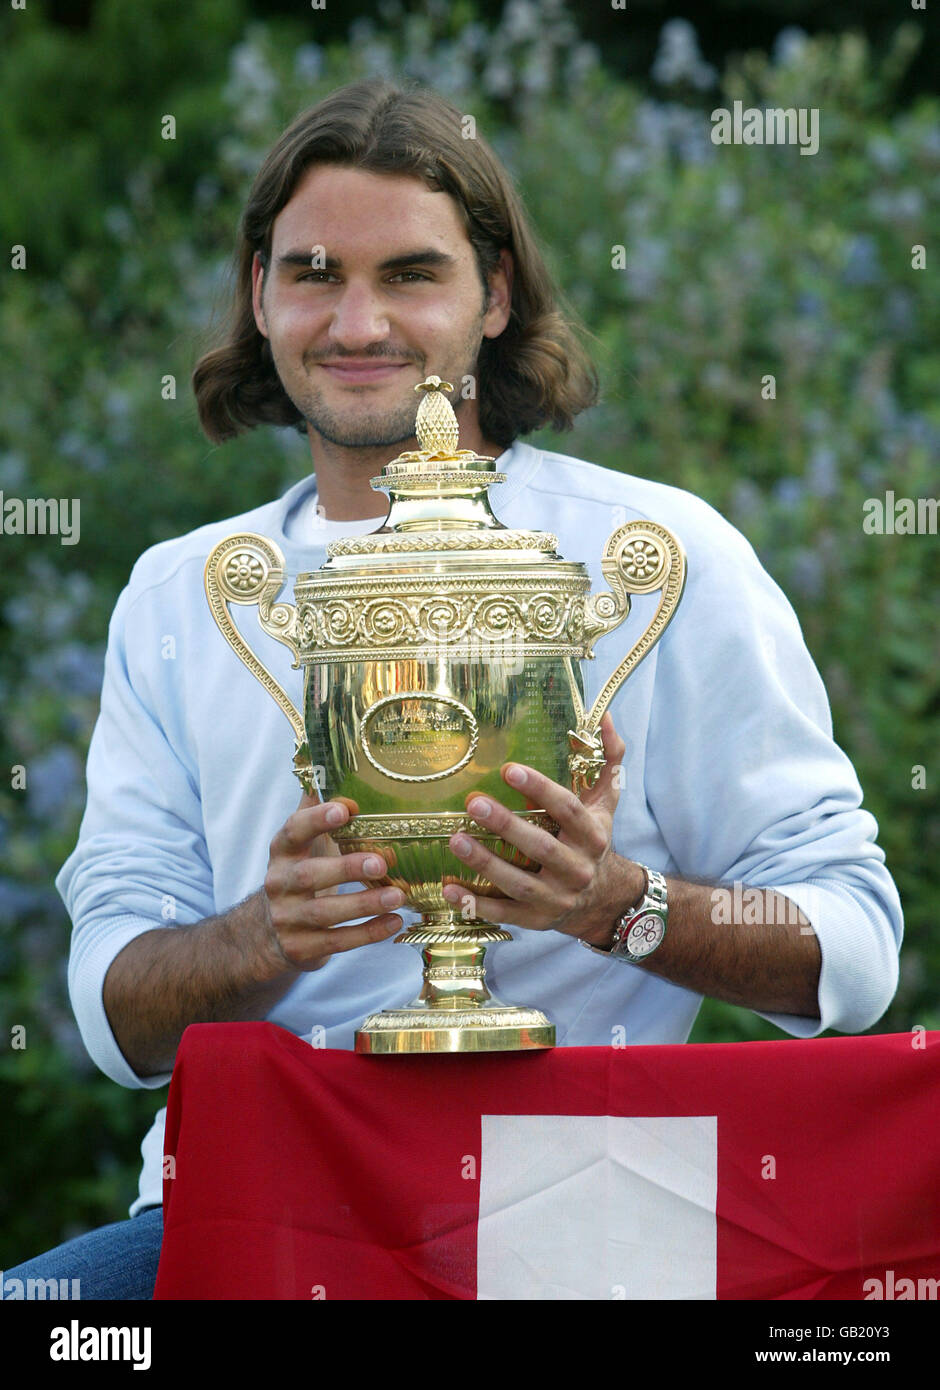 Tennis - Wimbledon 2003 - Men's Final - Mark Philippoussis v Roger Federer.  Roger Federer poses with the winners cup Stock Photo - Alamy